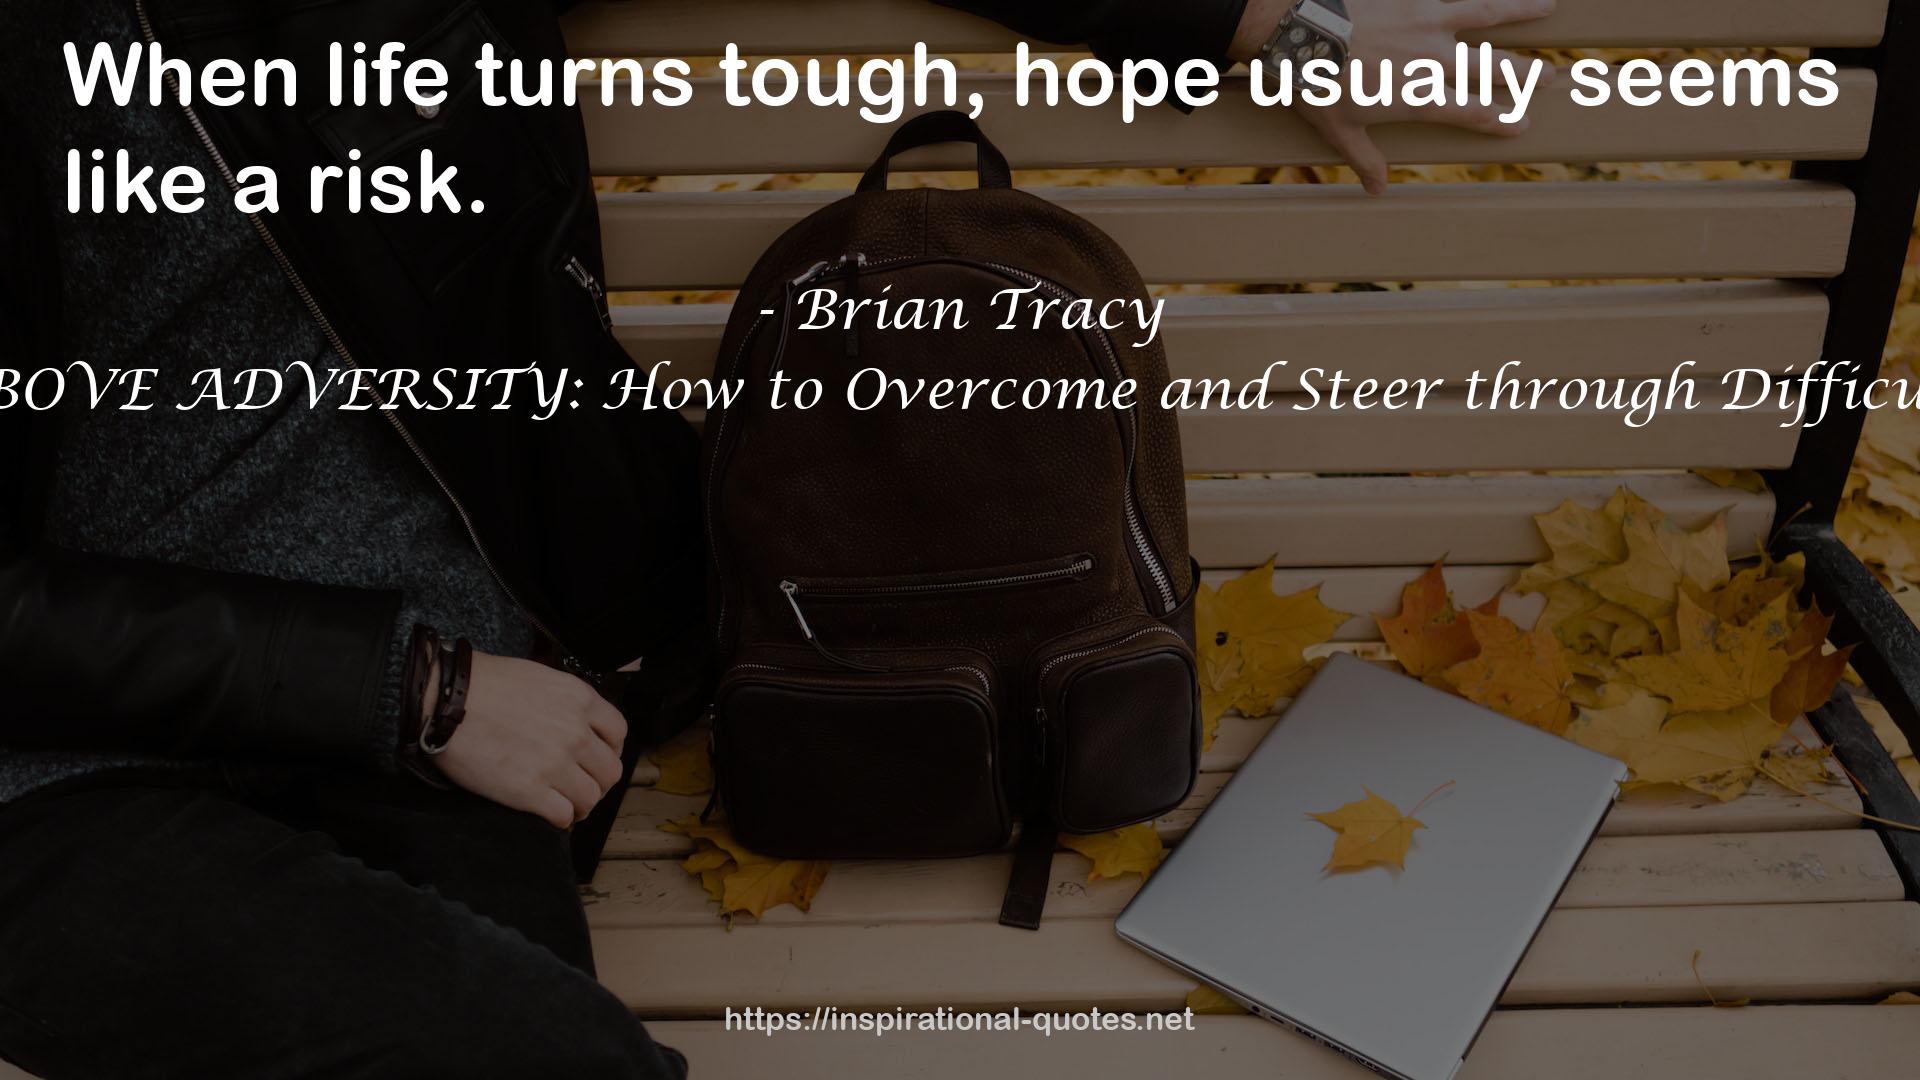 RISE ABOVE ADVERSITY: How to Overcome and Steer through Difficult Times QUOTES